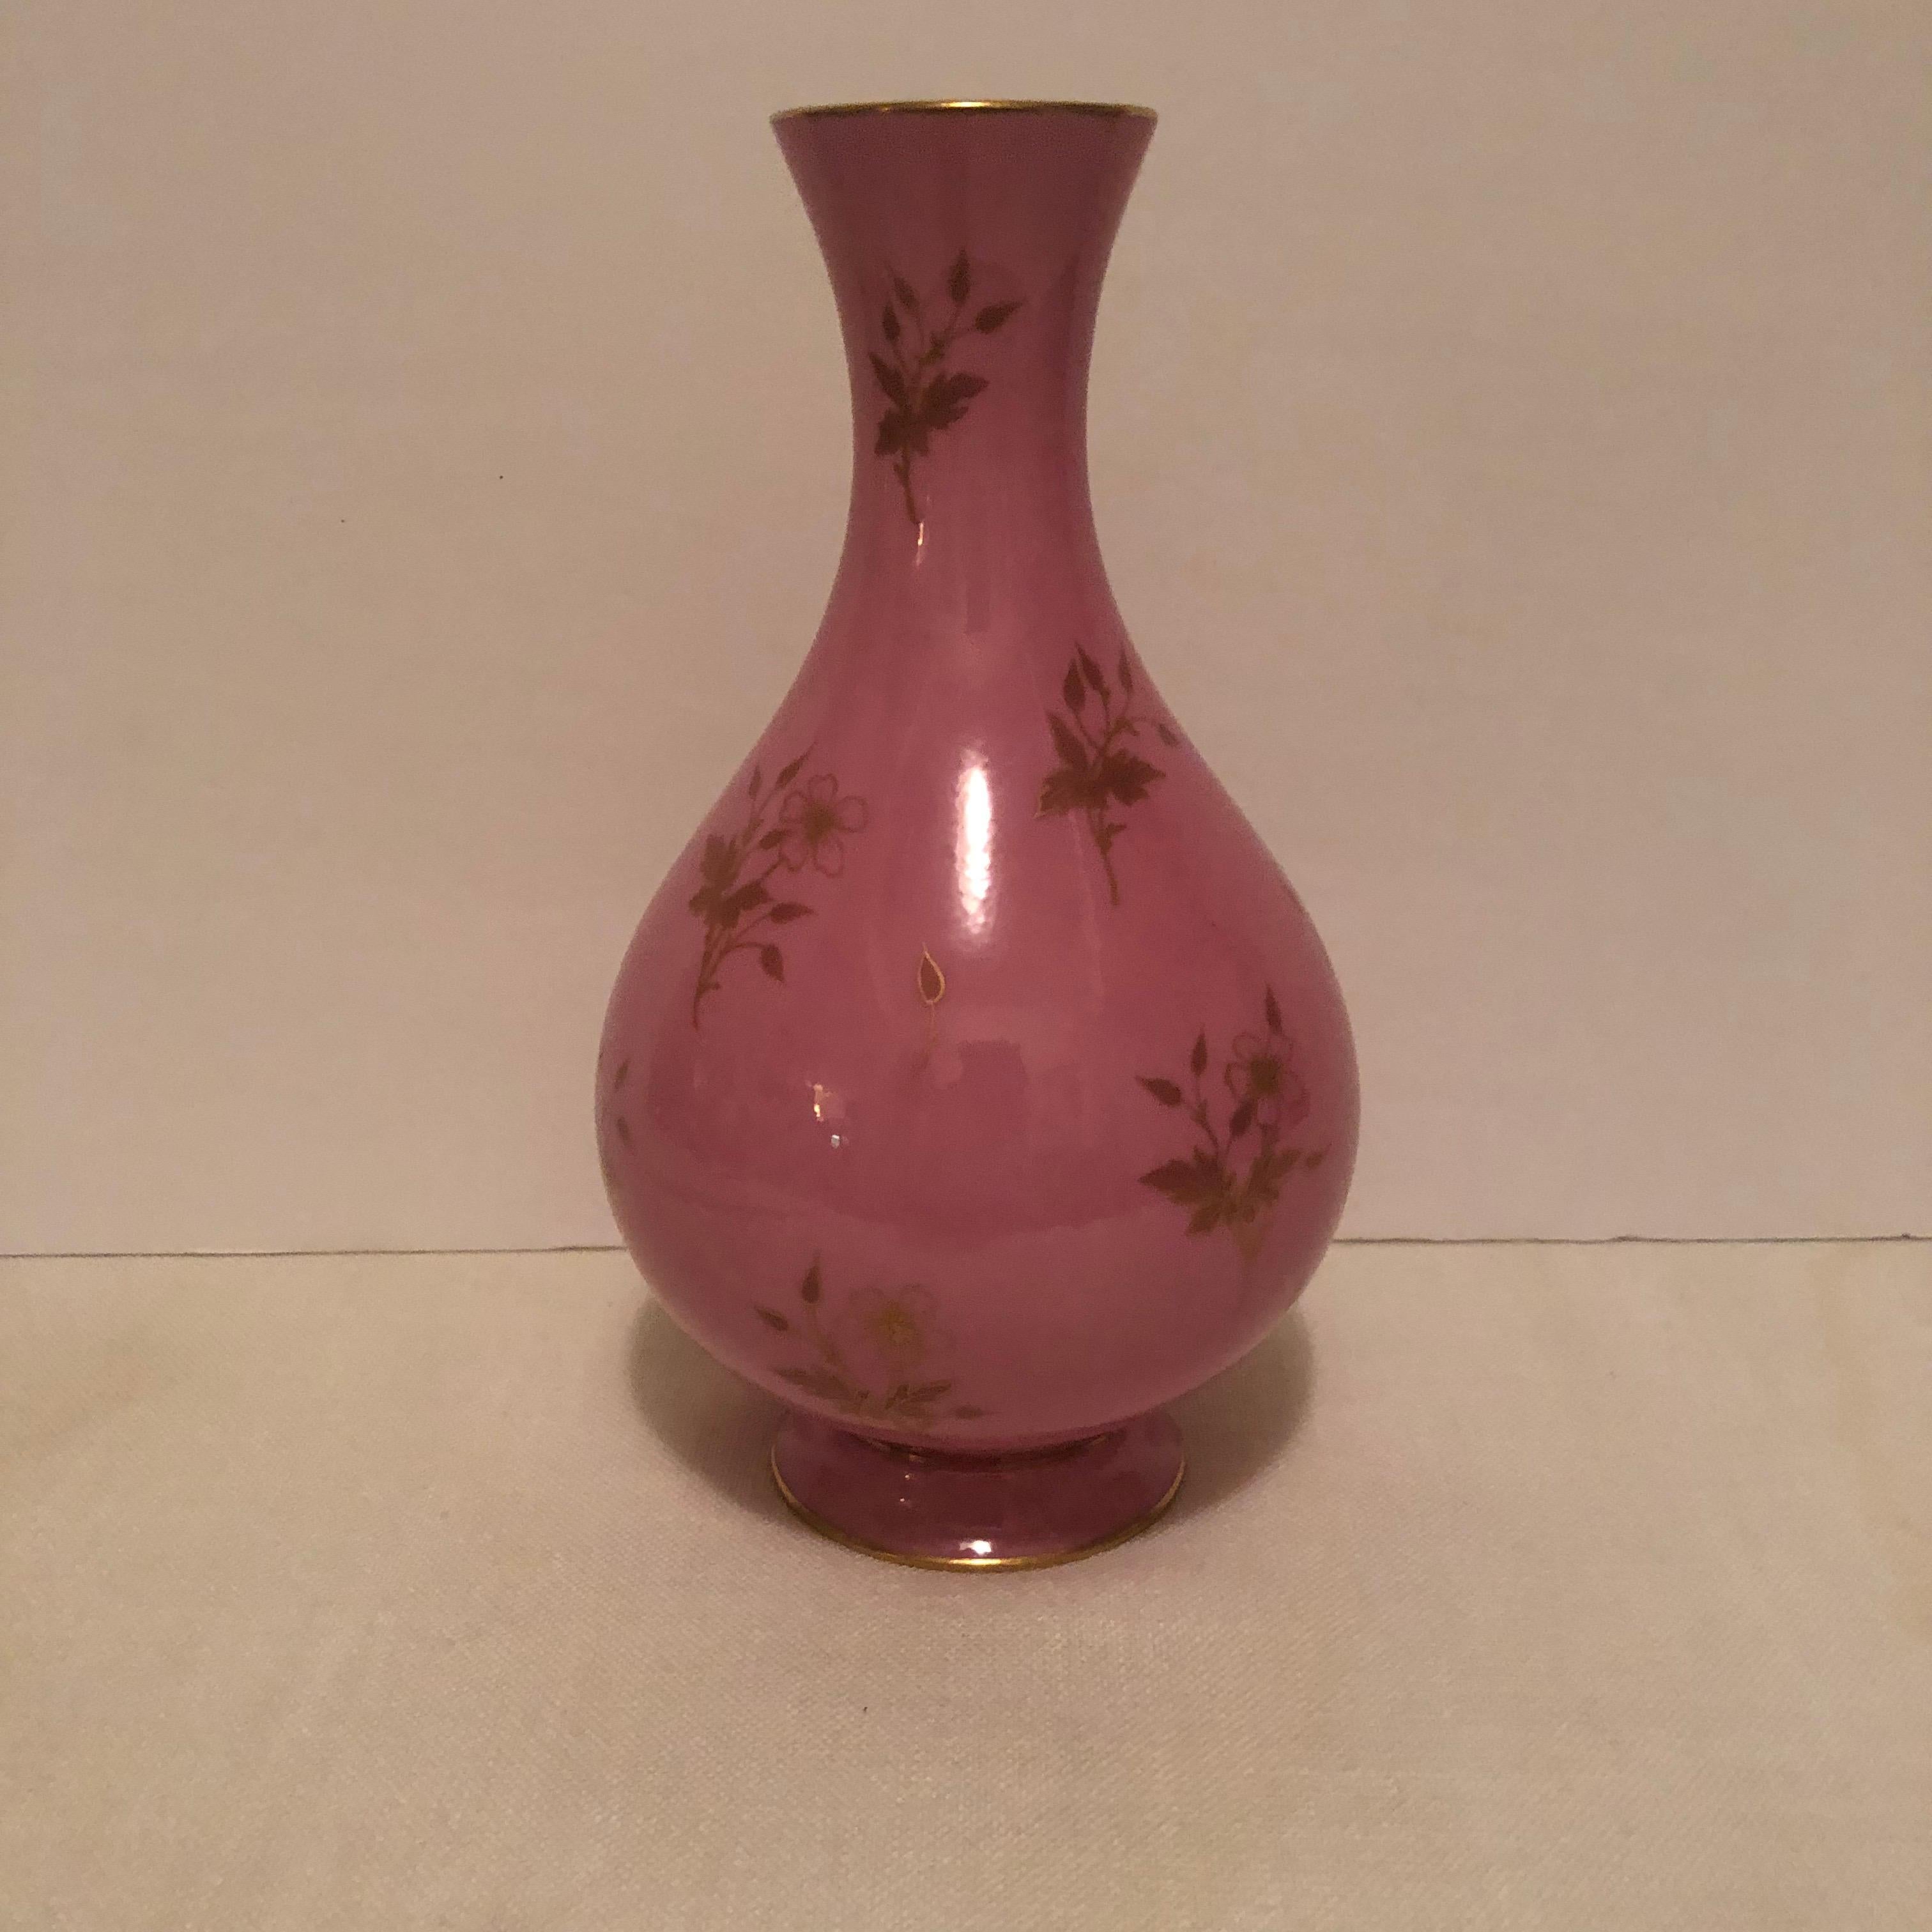 Hand-Painted Sevres Vase in the Pink Pompadour Color Accented With Painted Gold Flowers